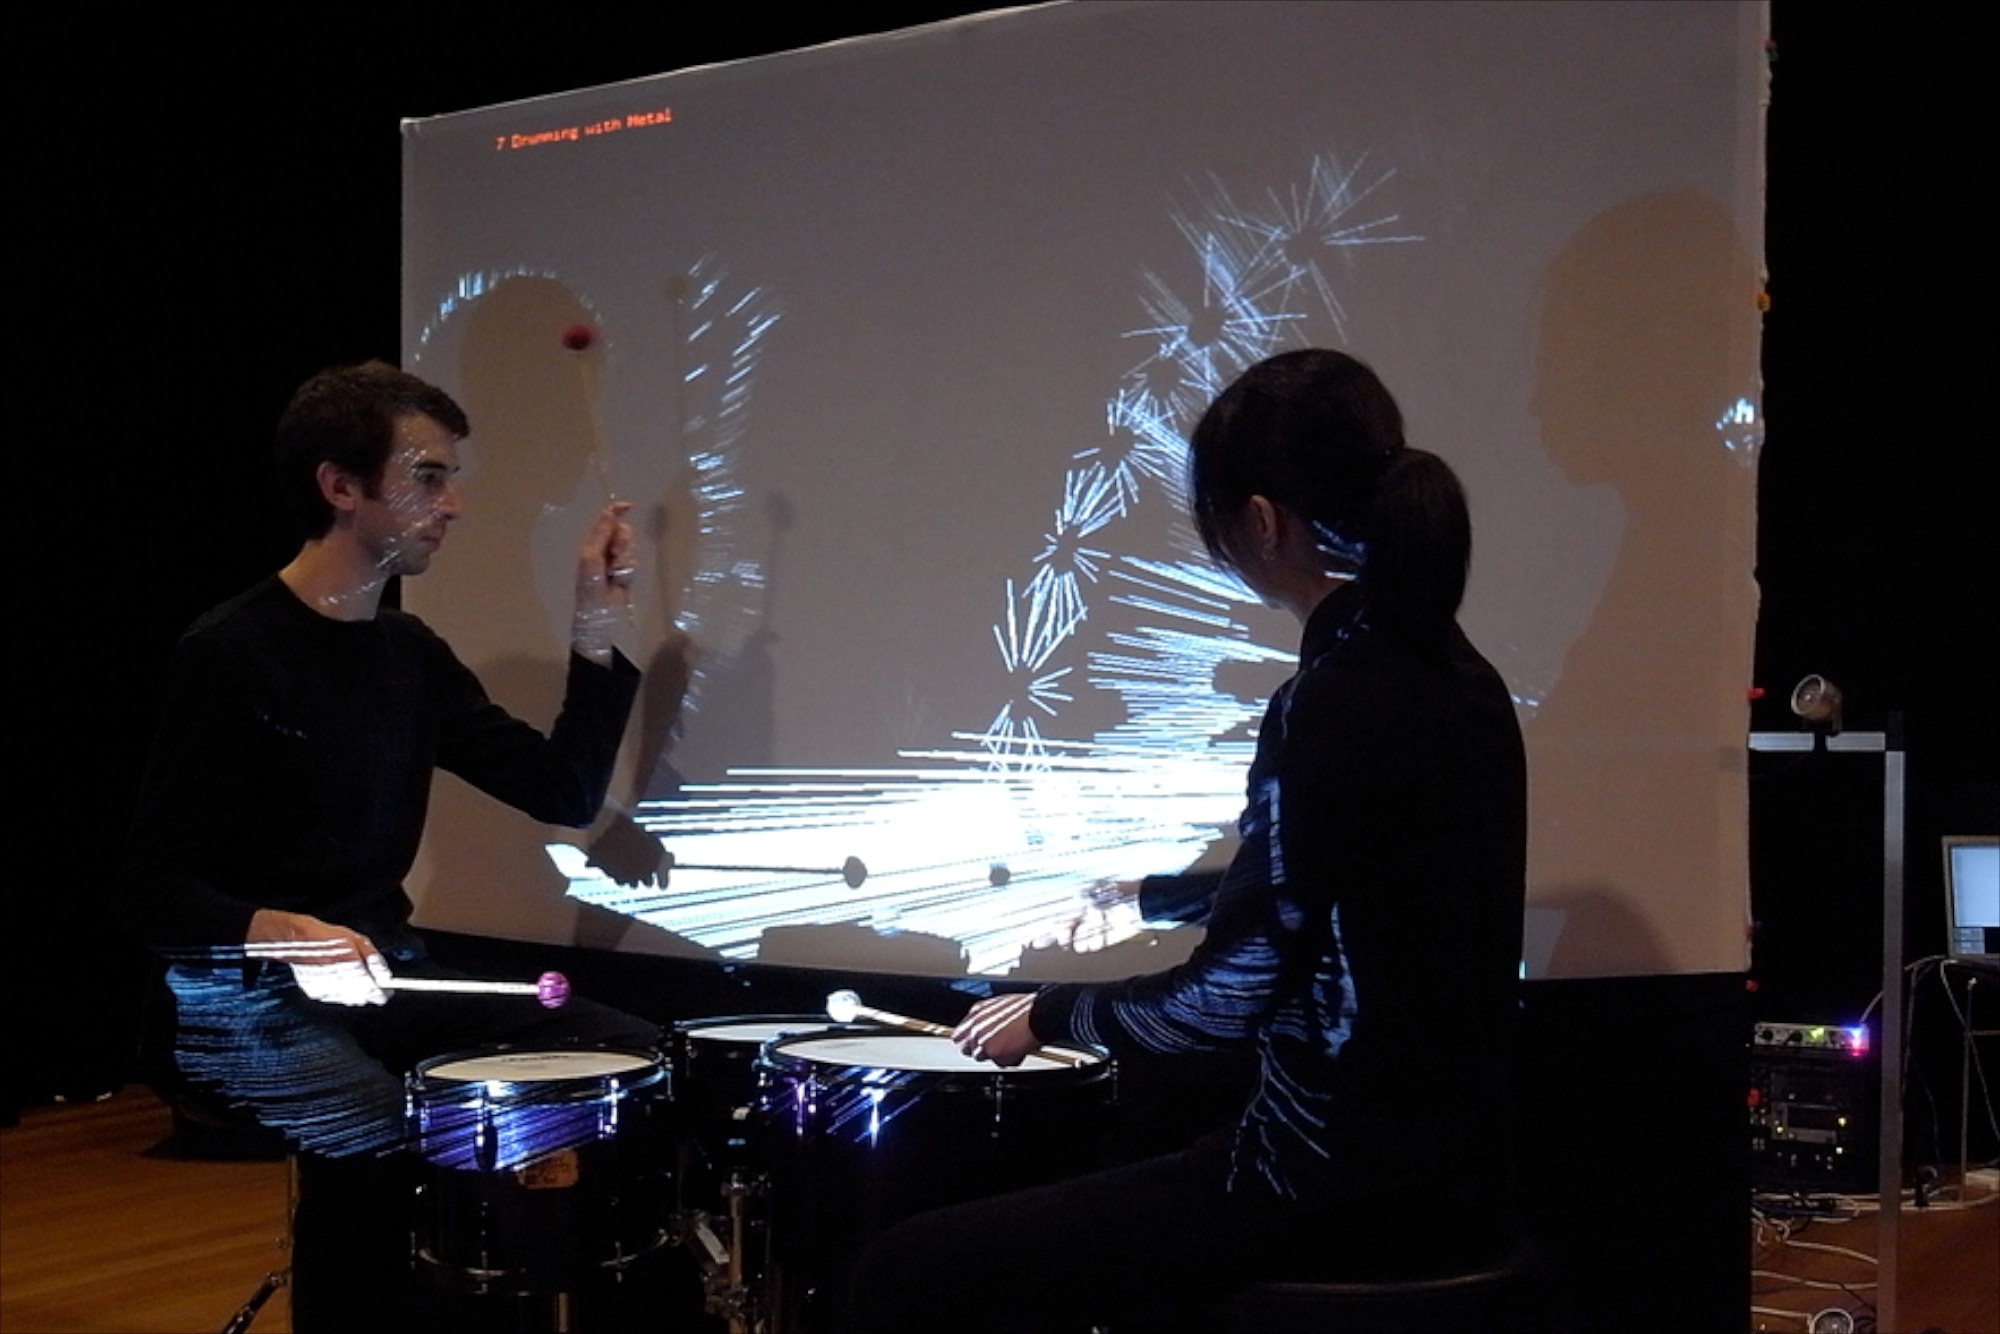 Charles Martin and Chi-Hsia Lai performing Strike on Stage. The performers sit in front of the screen and move sticks to trigger sounds.